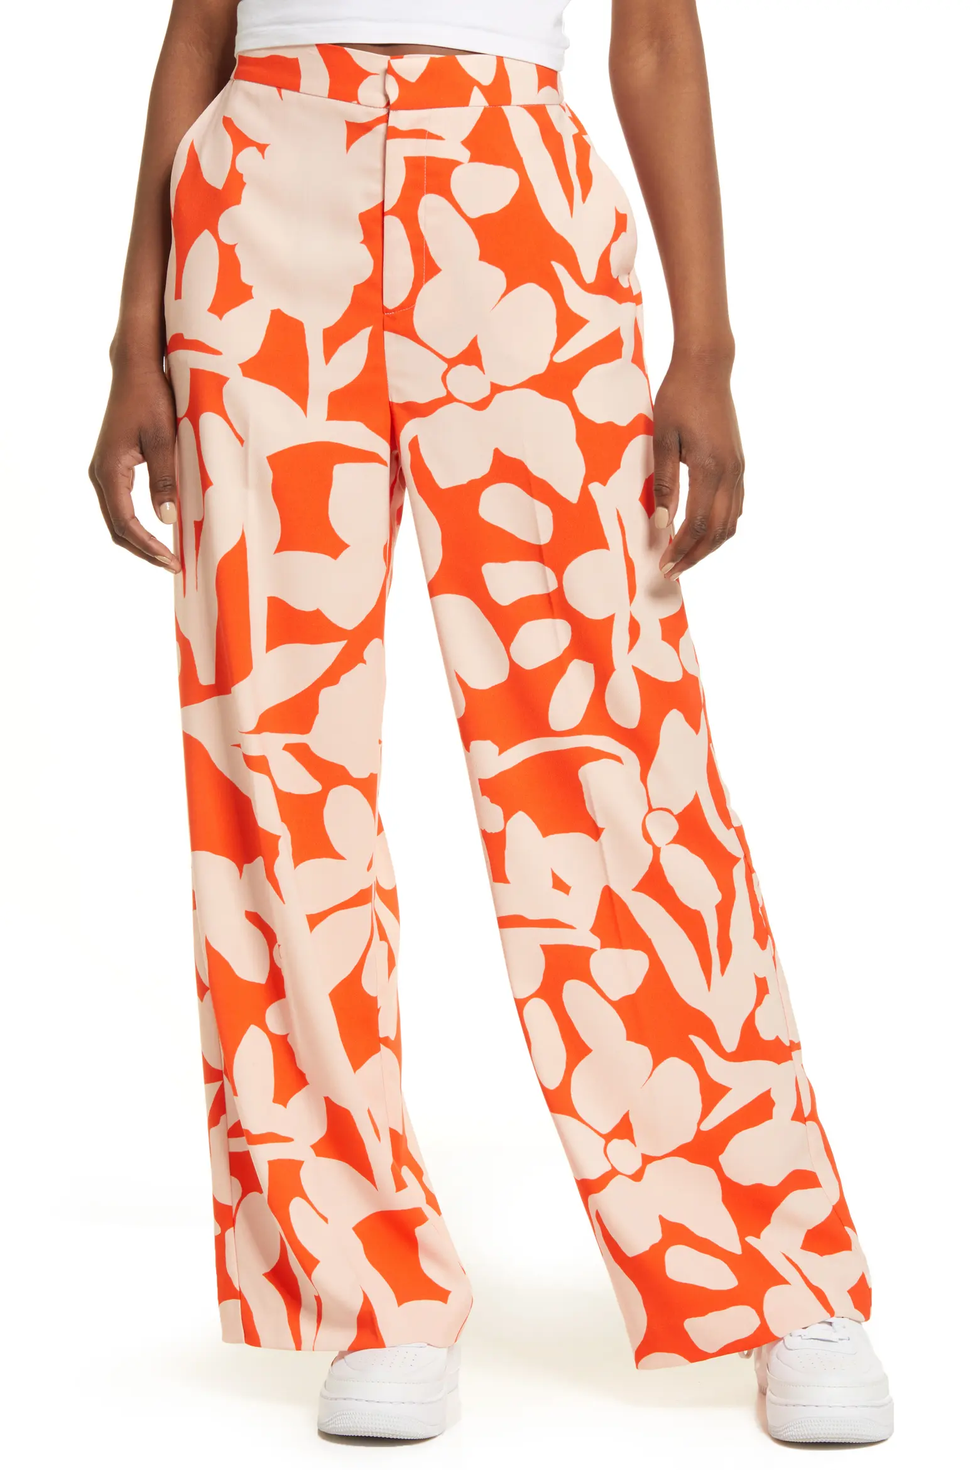 Buy Summer Pants for Women Online at Best Price